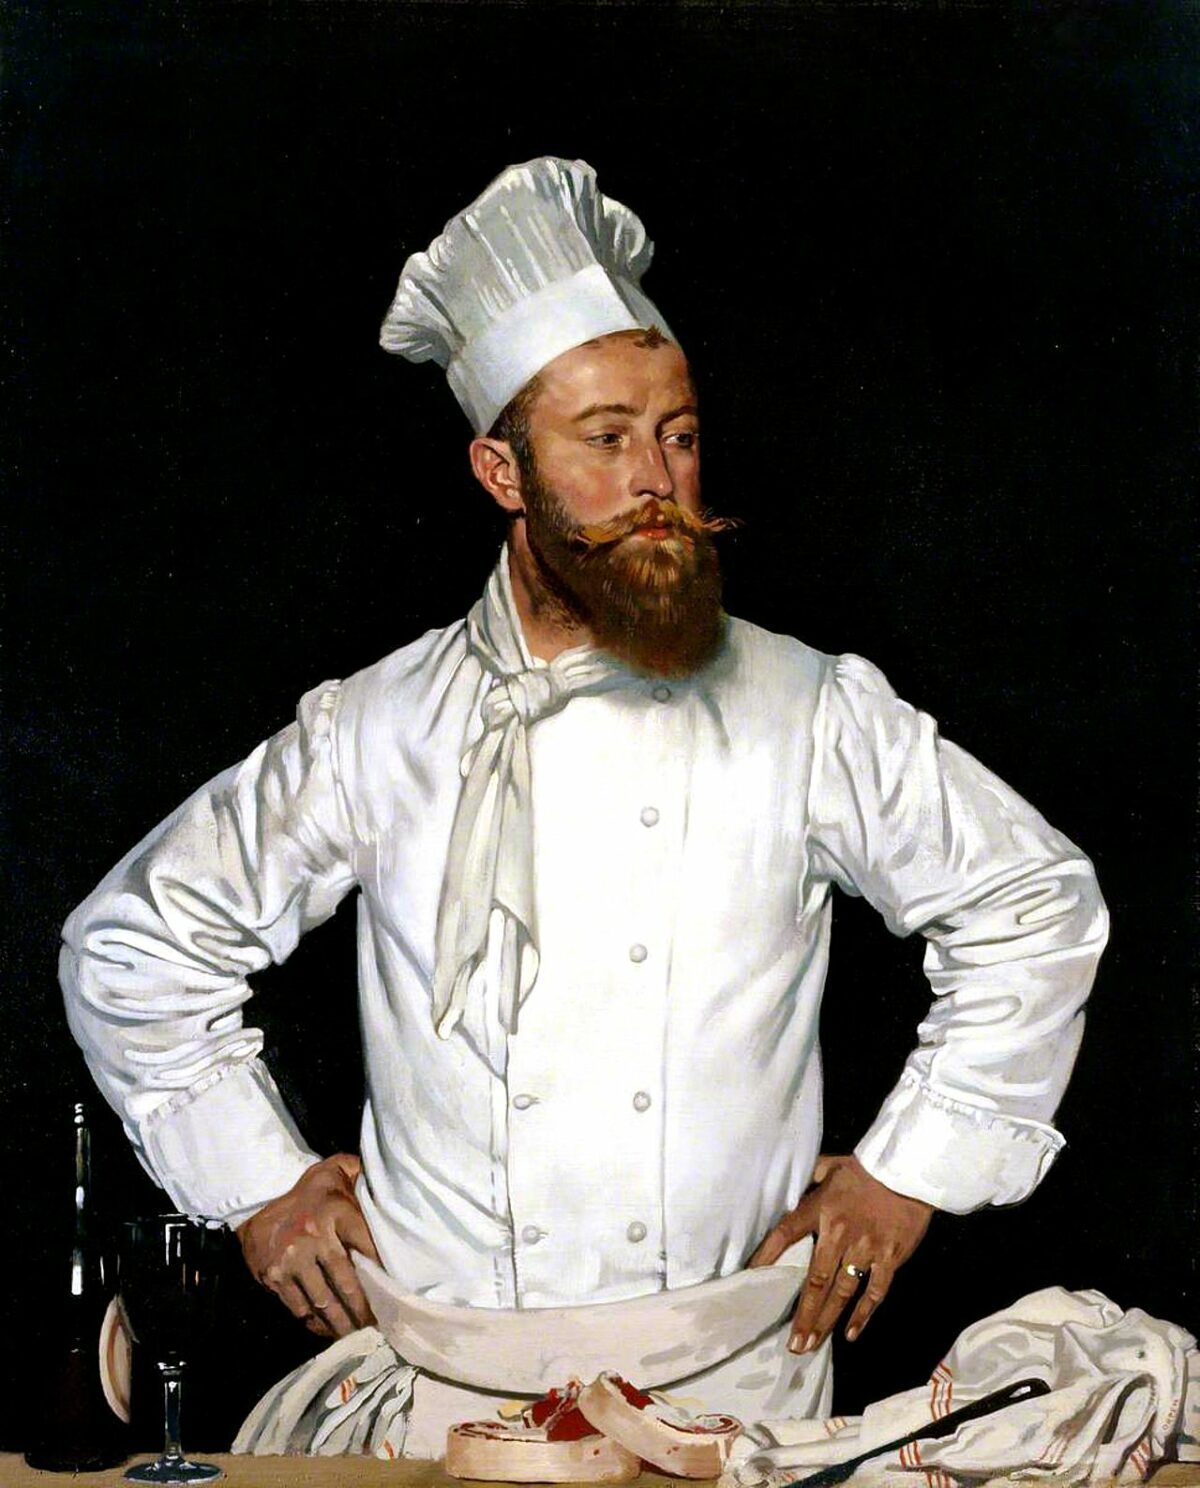 The word toque used for a chef's hat.